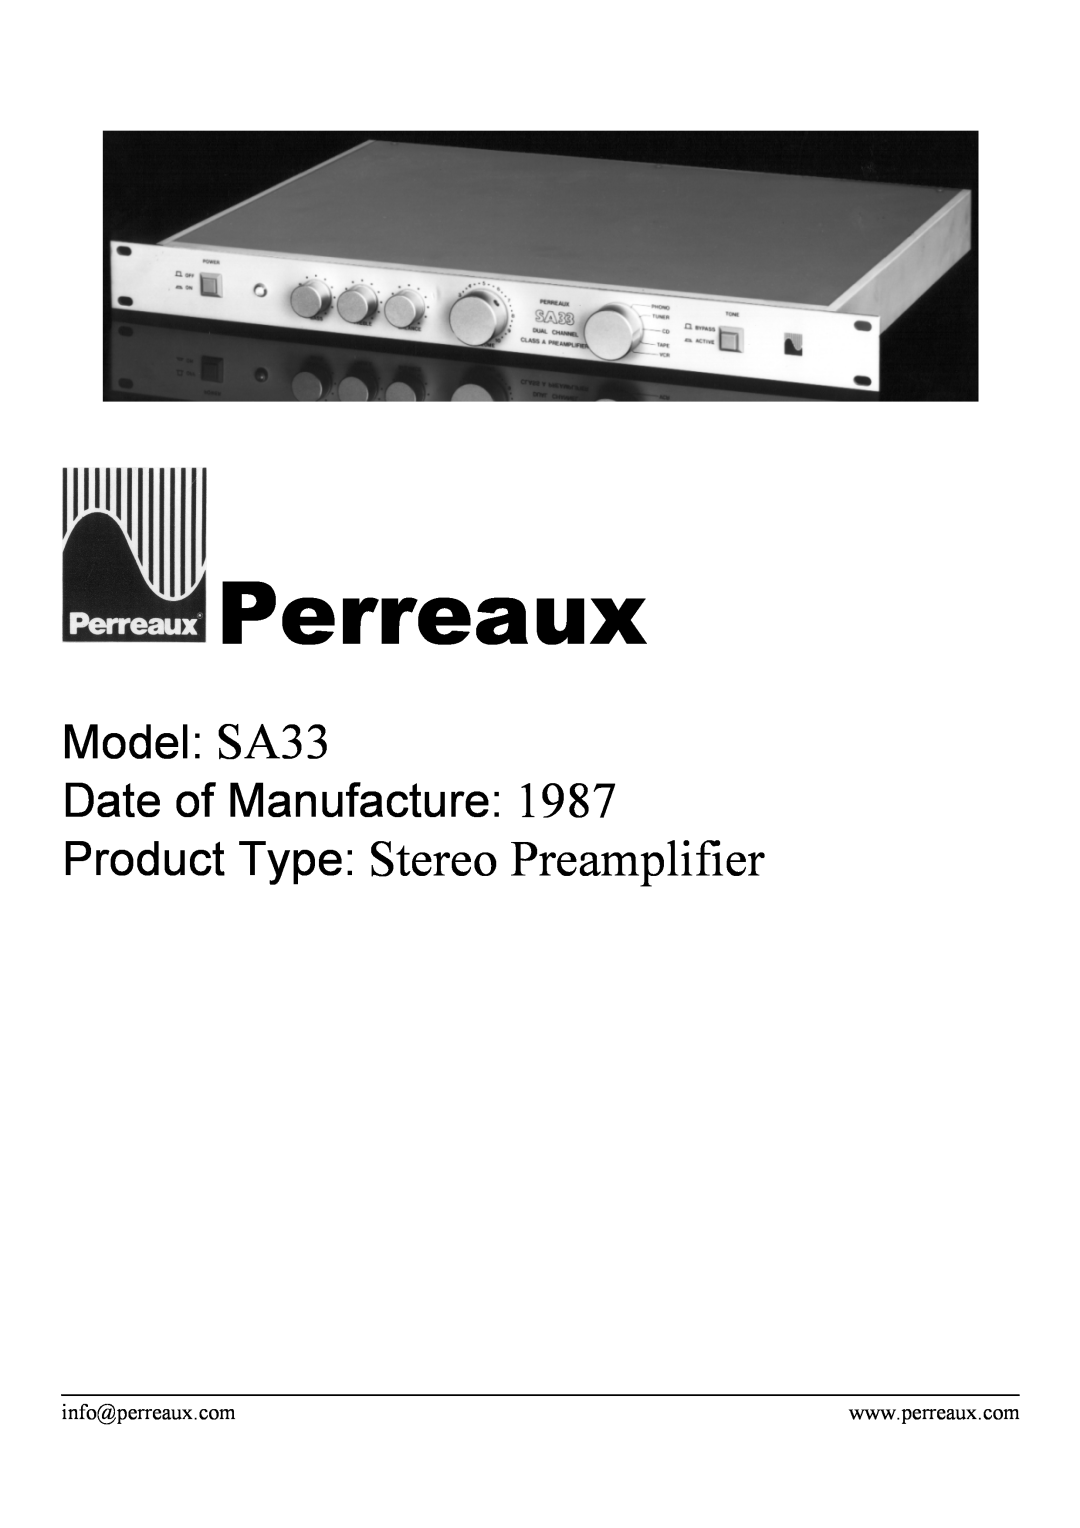 Perreaux manual Perreaux, Product Type Stereo Preamplifier, Model SA33 Date of Manufacture 